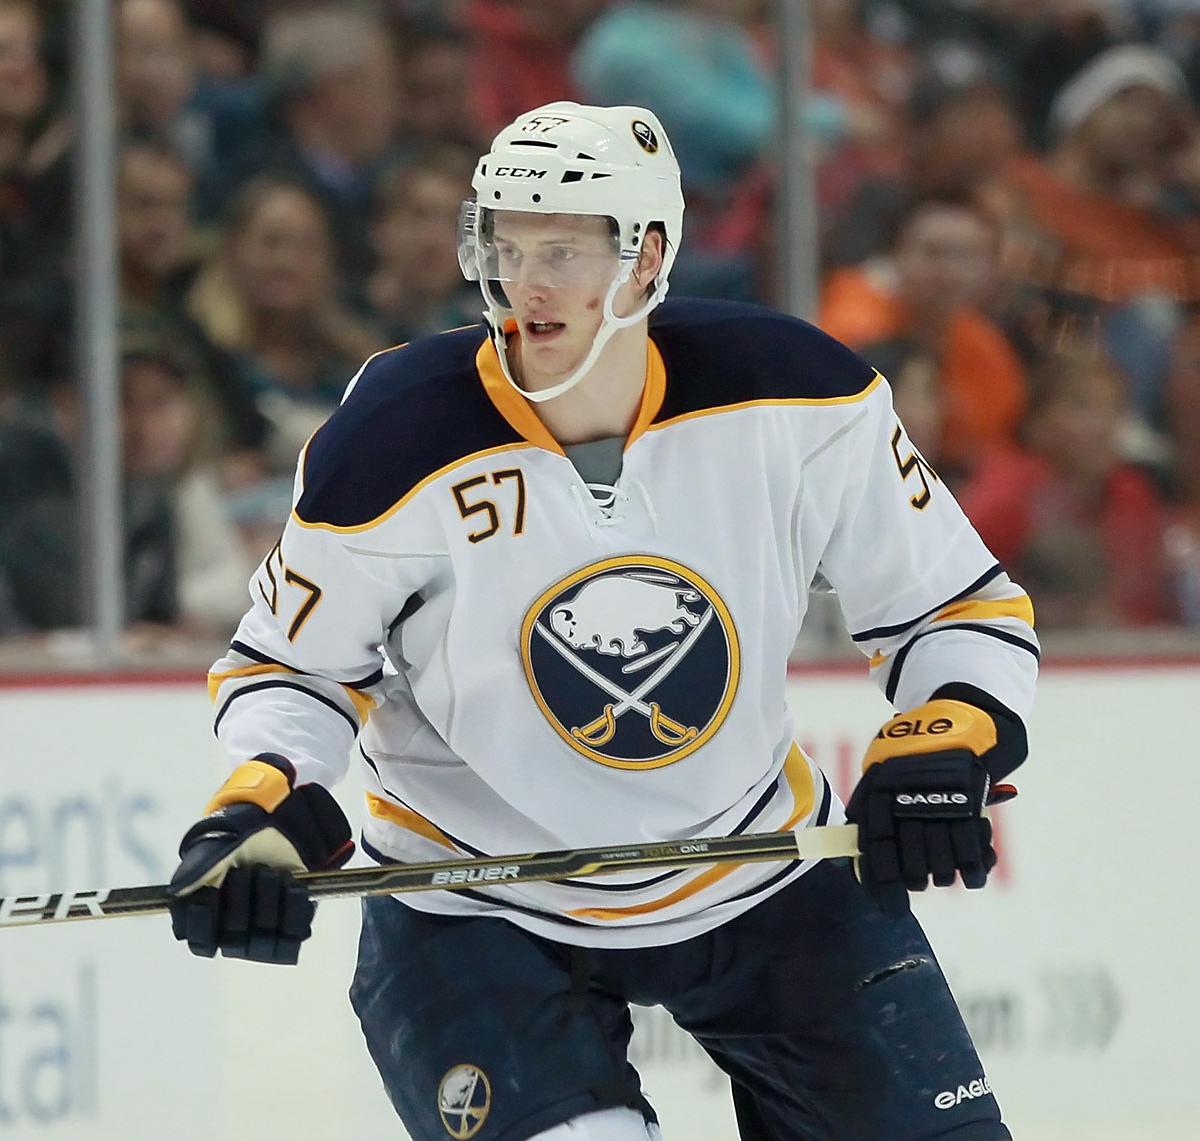 Marcus Foligno plays physical but he also can score, kill